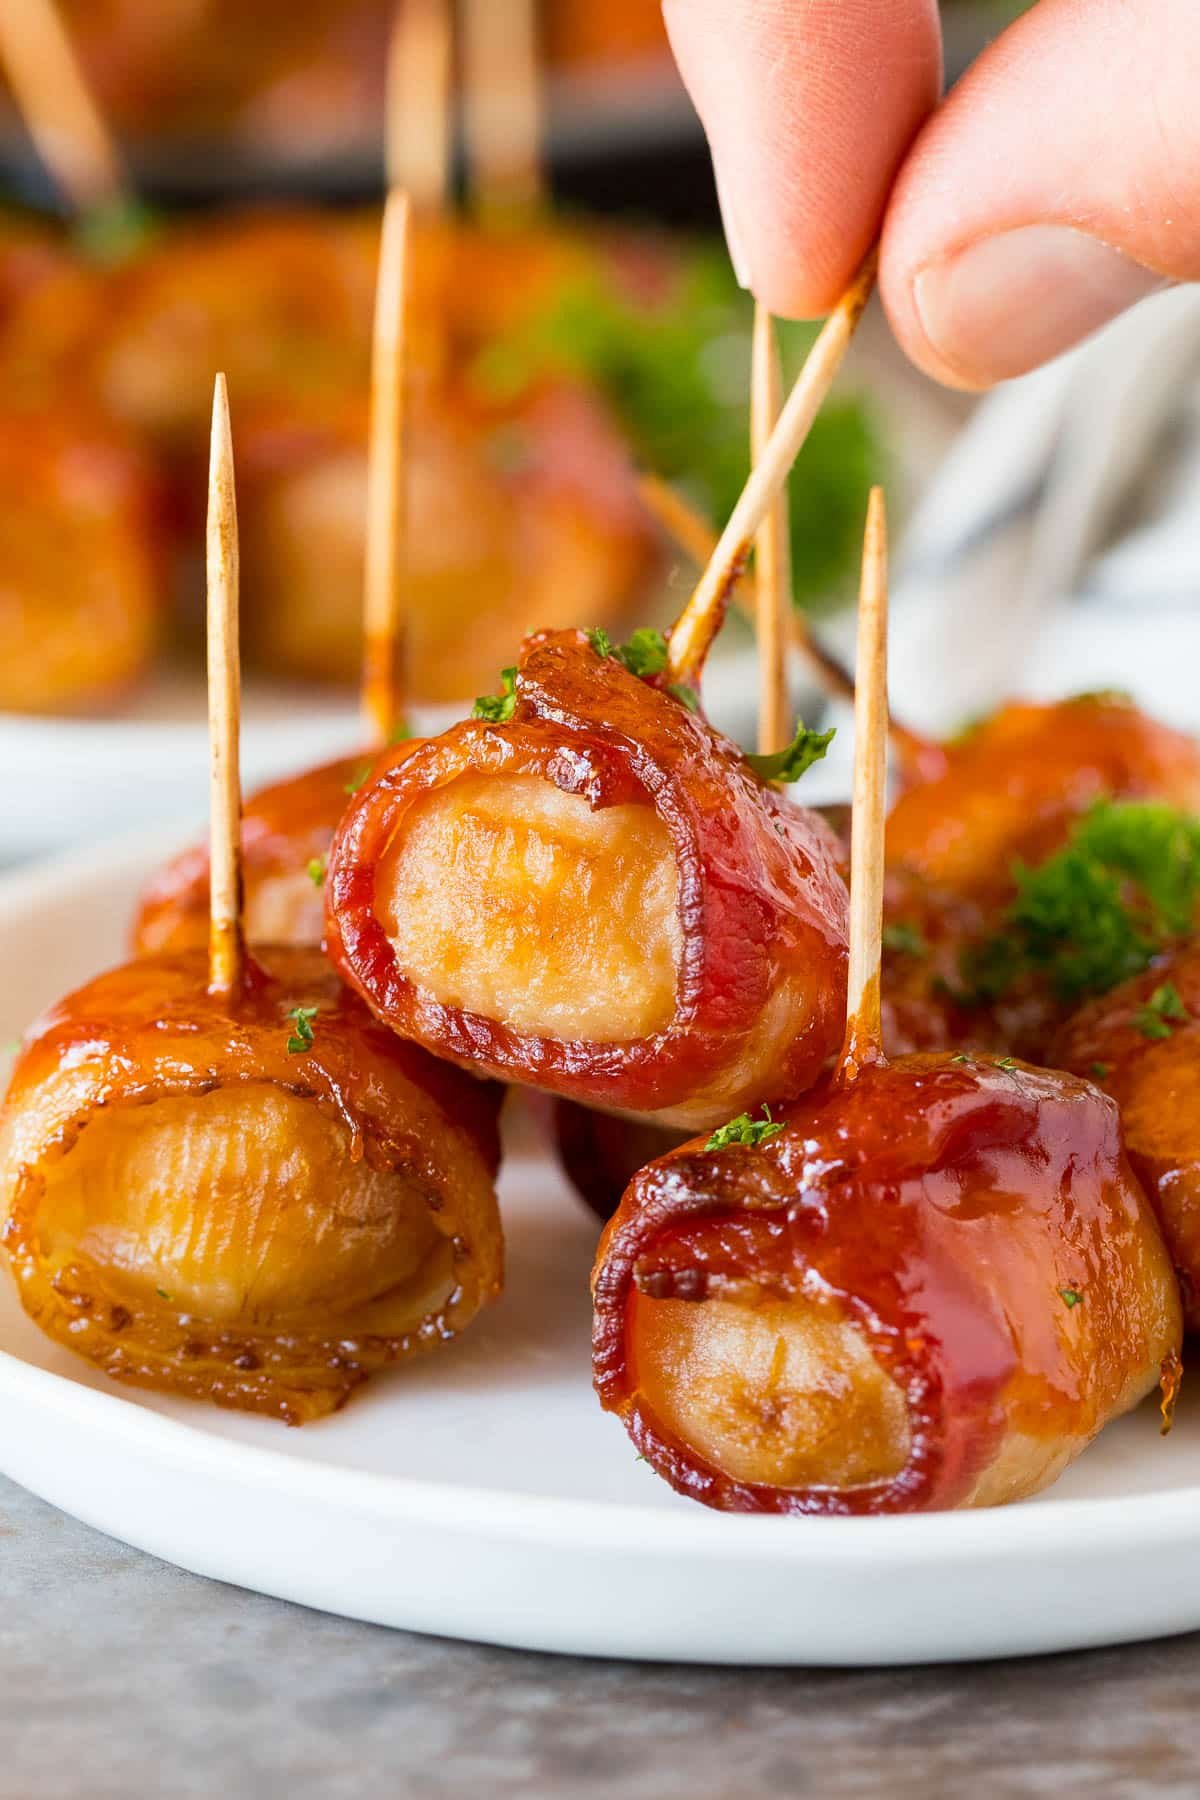 A hand taking bacon wrapped water chestnuts off a serving plate.